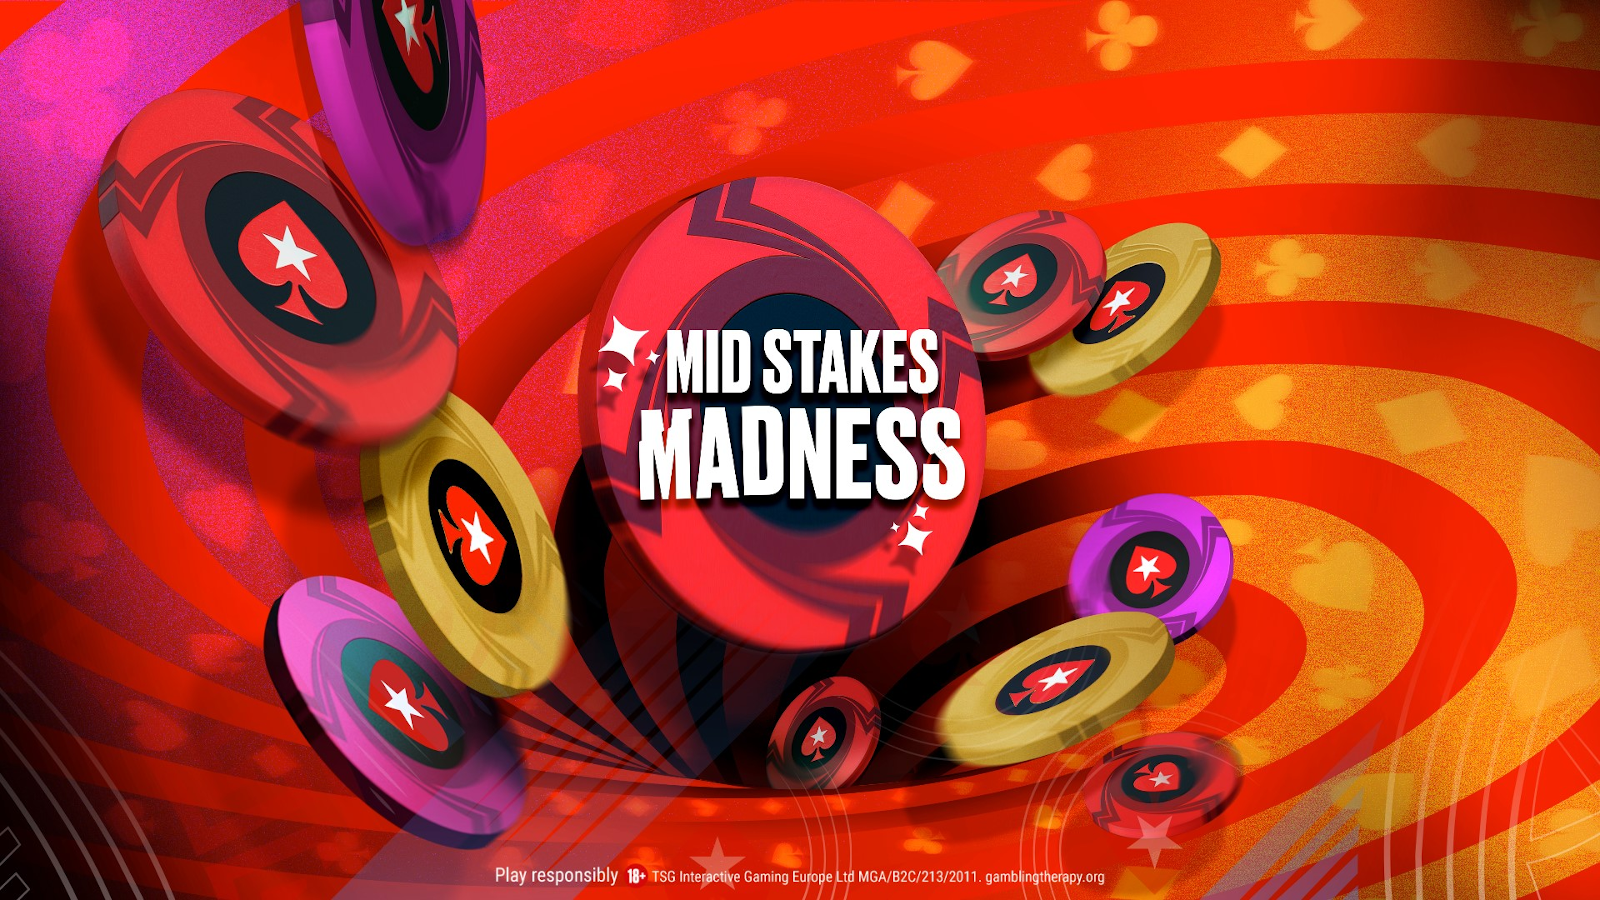 A Week of Midstakes Madness Is On at PokerStars